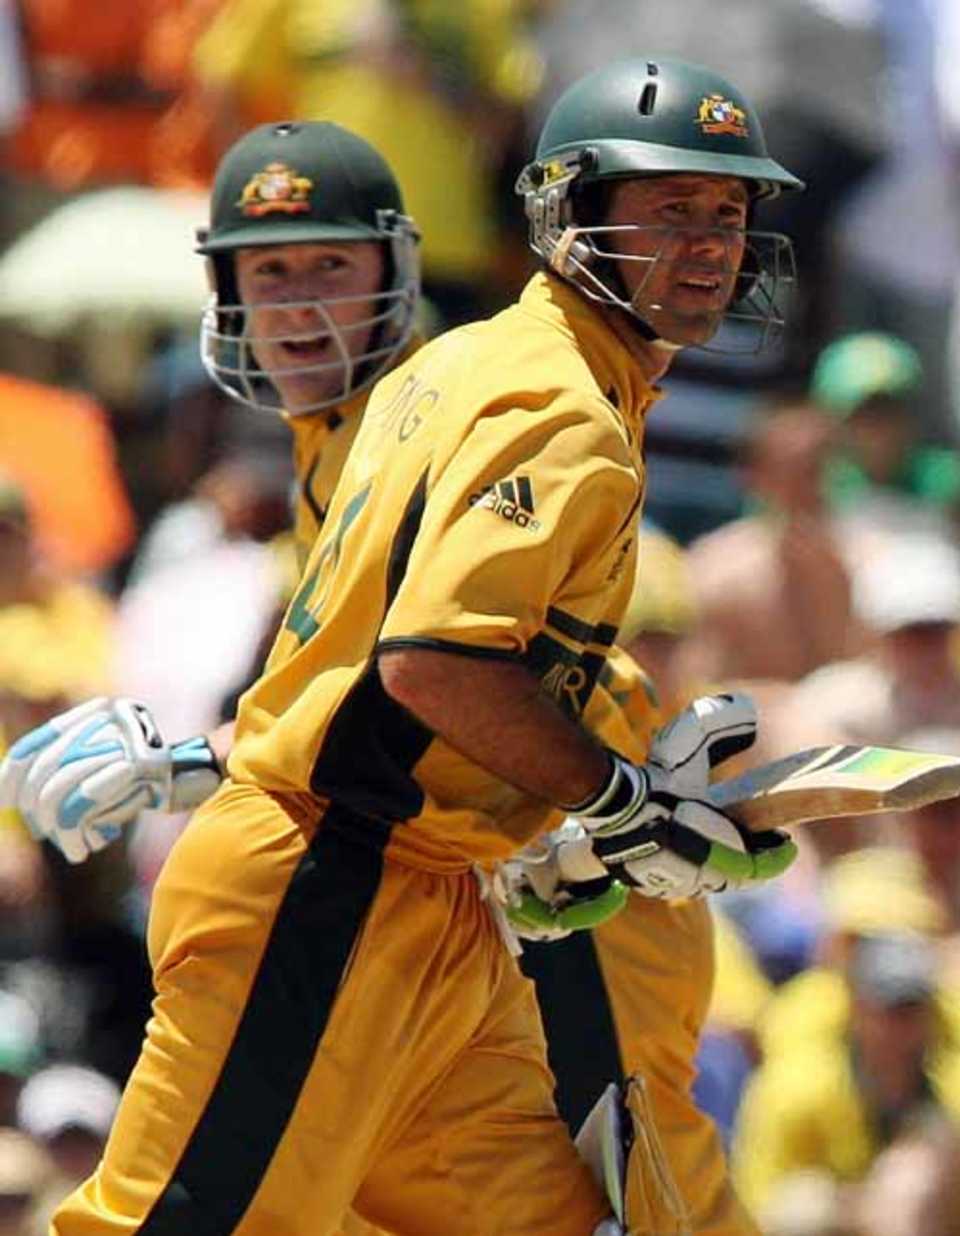 Ricky Ponting and Michael Clarke added 161 for the third wicket, Group A, St Kitts, March 24, 2007